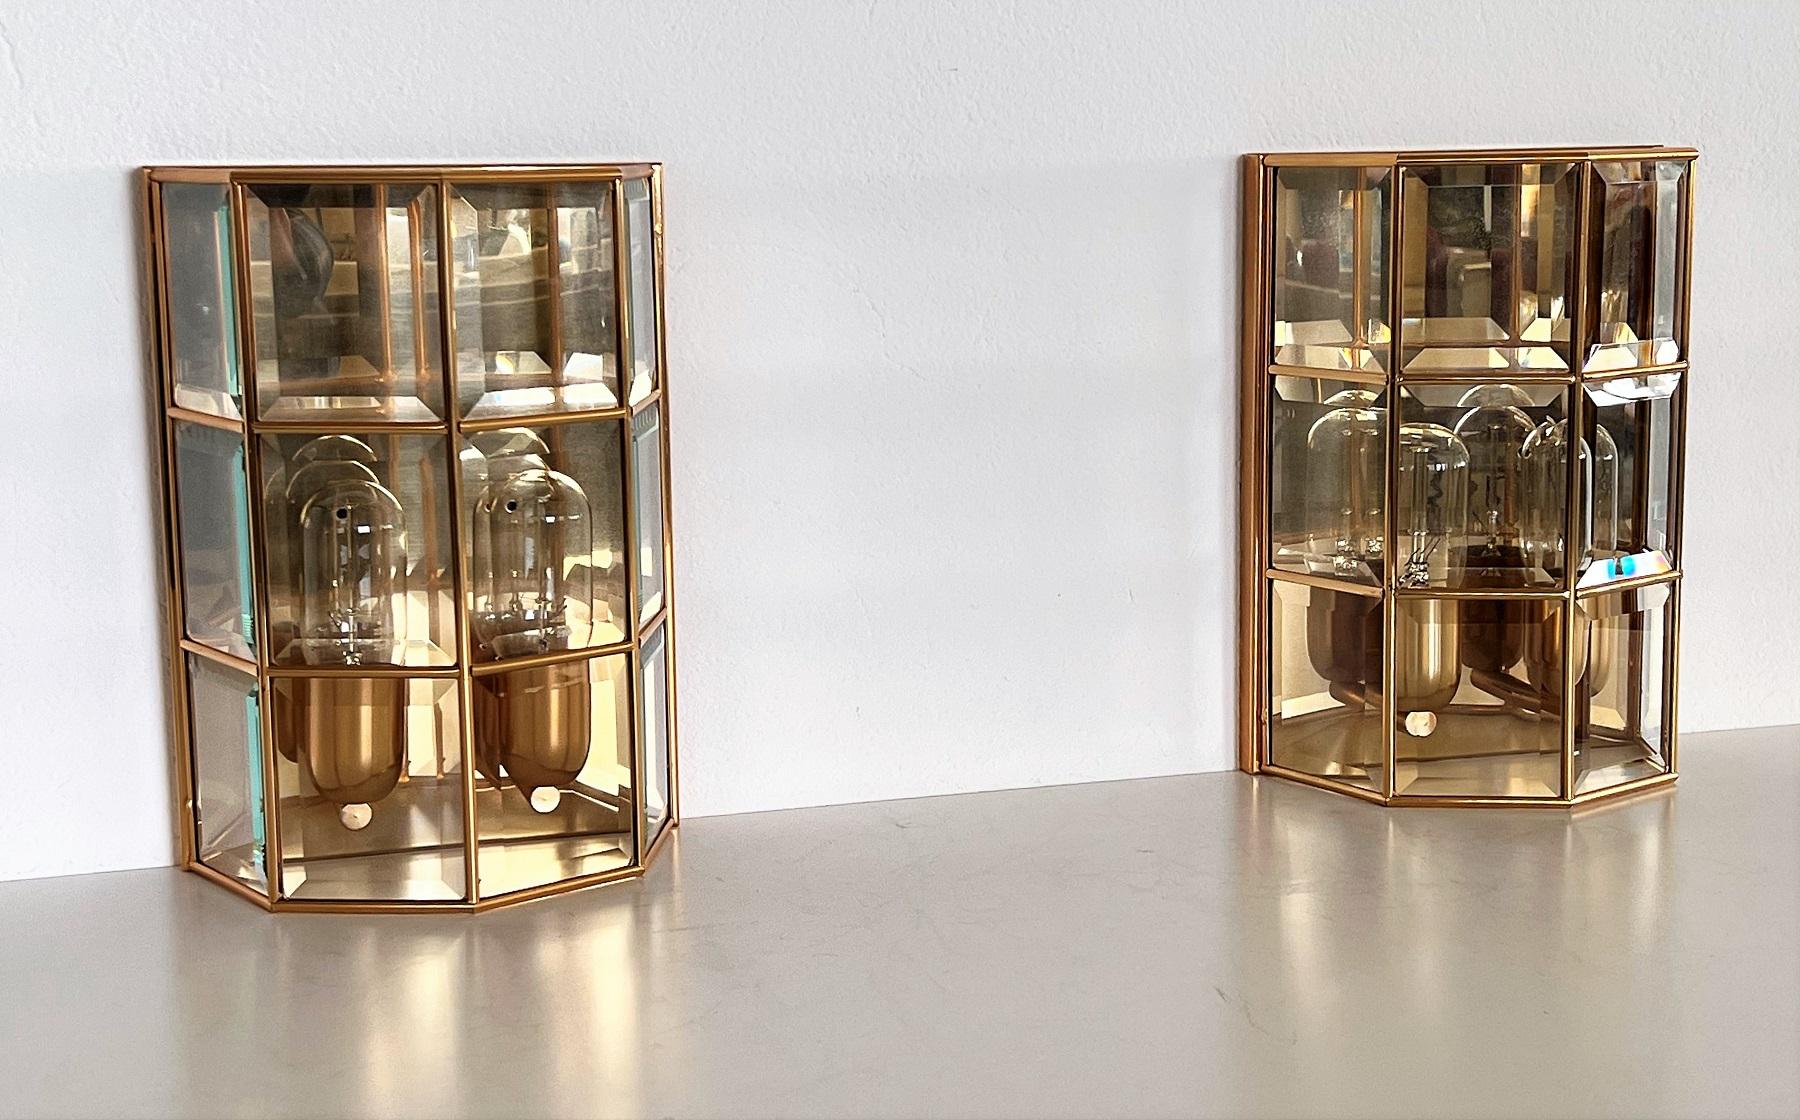 Gorgeous and shiny pair of wall sconces Made in Italy of great craftsmanship.
The single glass pieces have all cut at the edges, which gives them a gorgeous shiny effect in the elegant Hollywood Regency style.
They are mounted on a metal frame